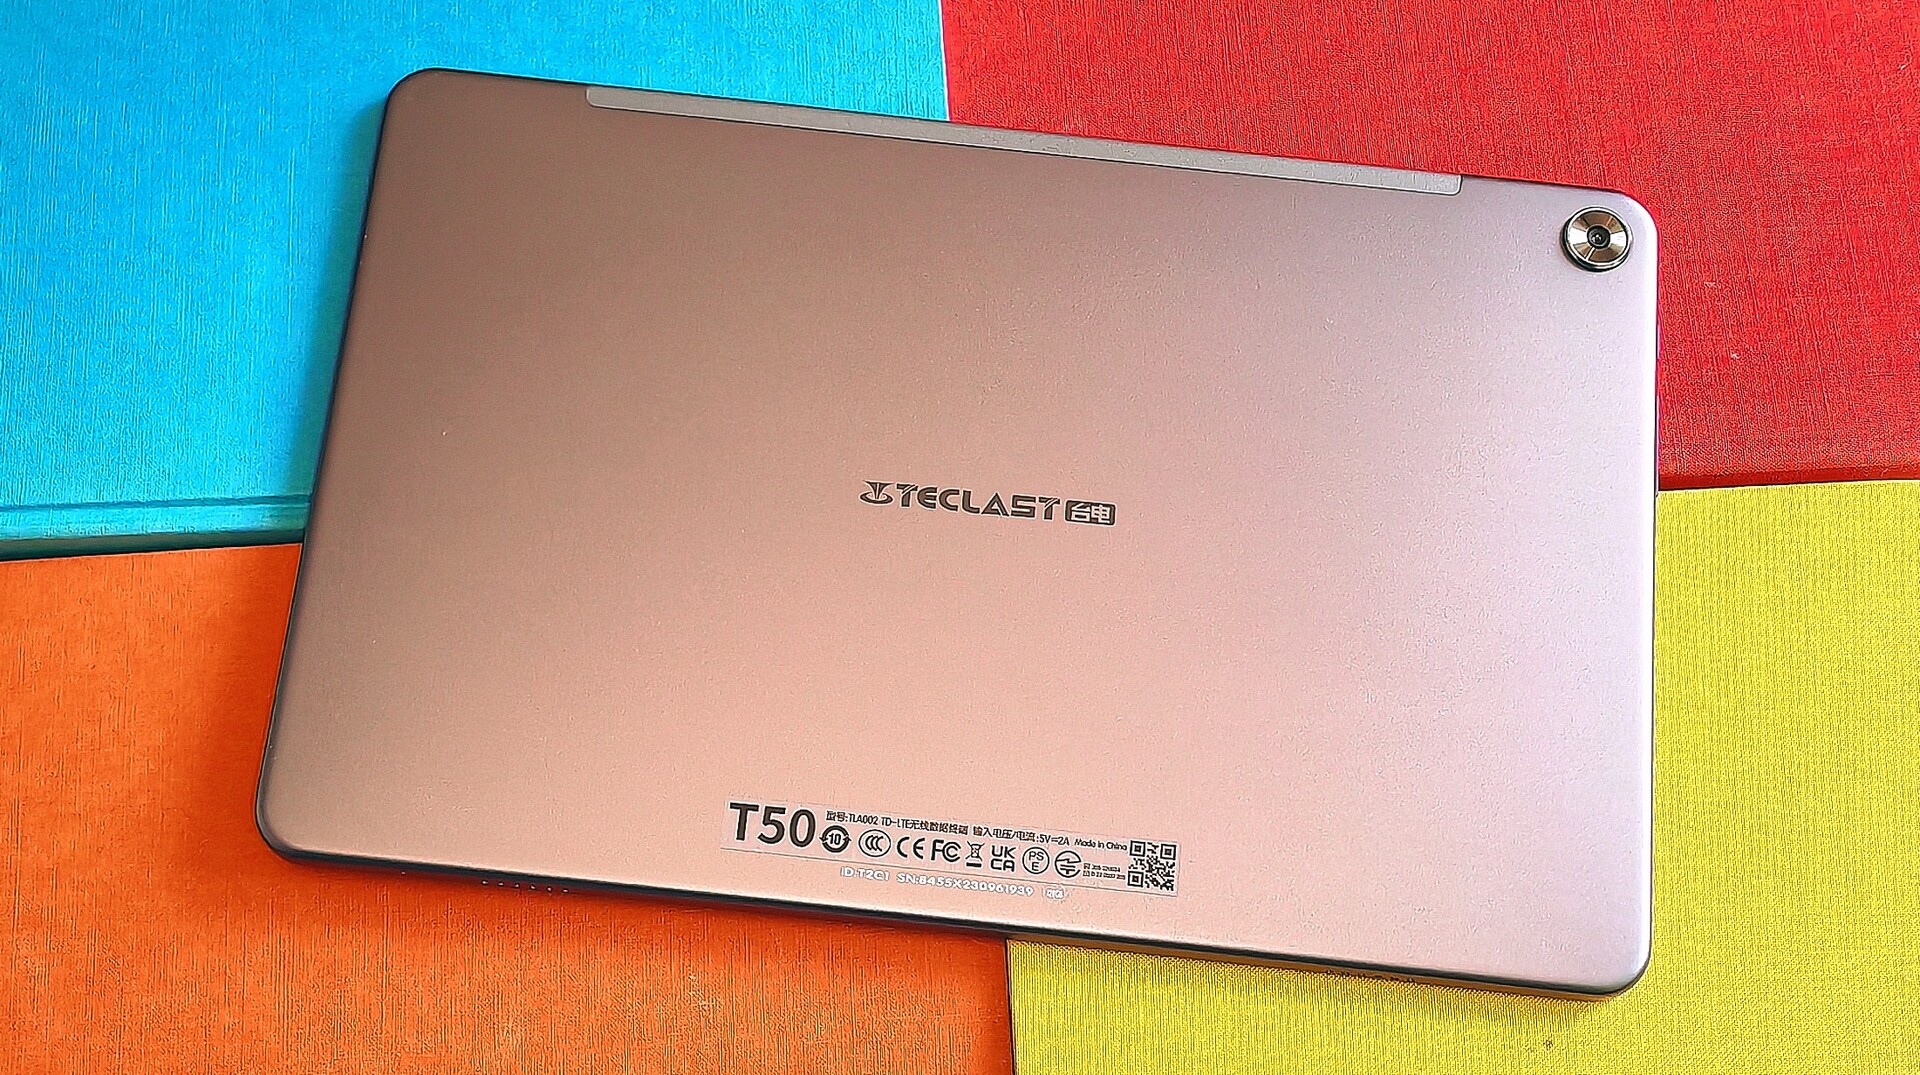 Teclast T50 Tablet review - The price-performance ratio